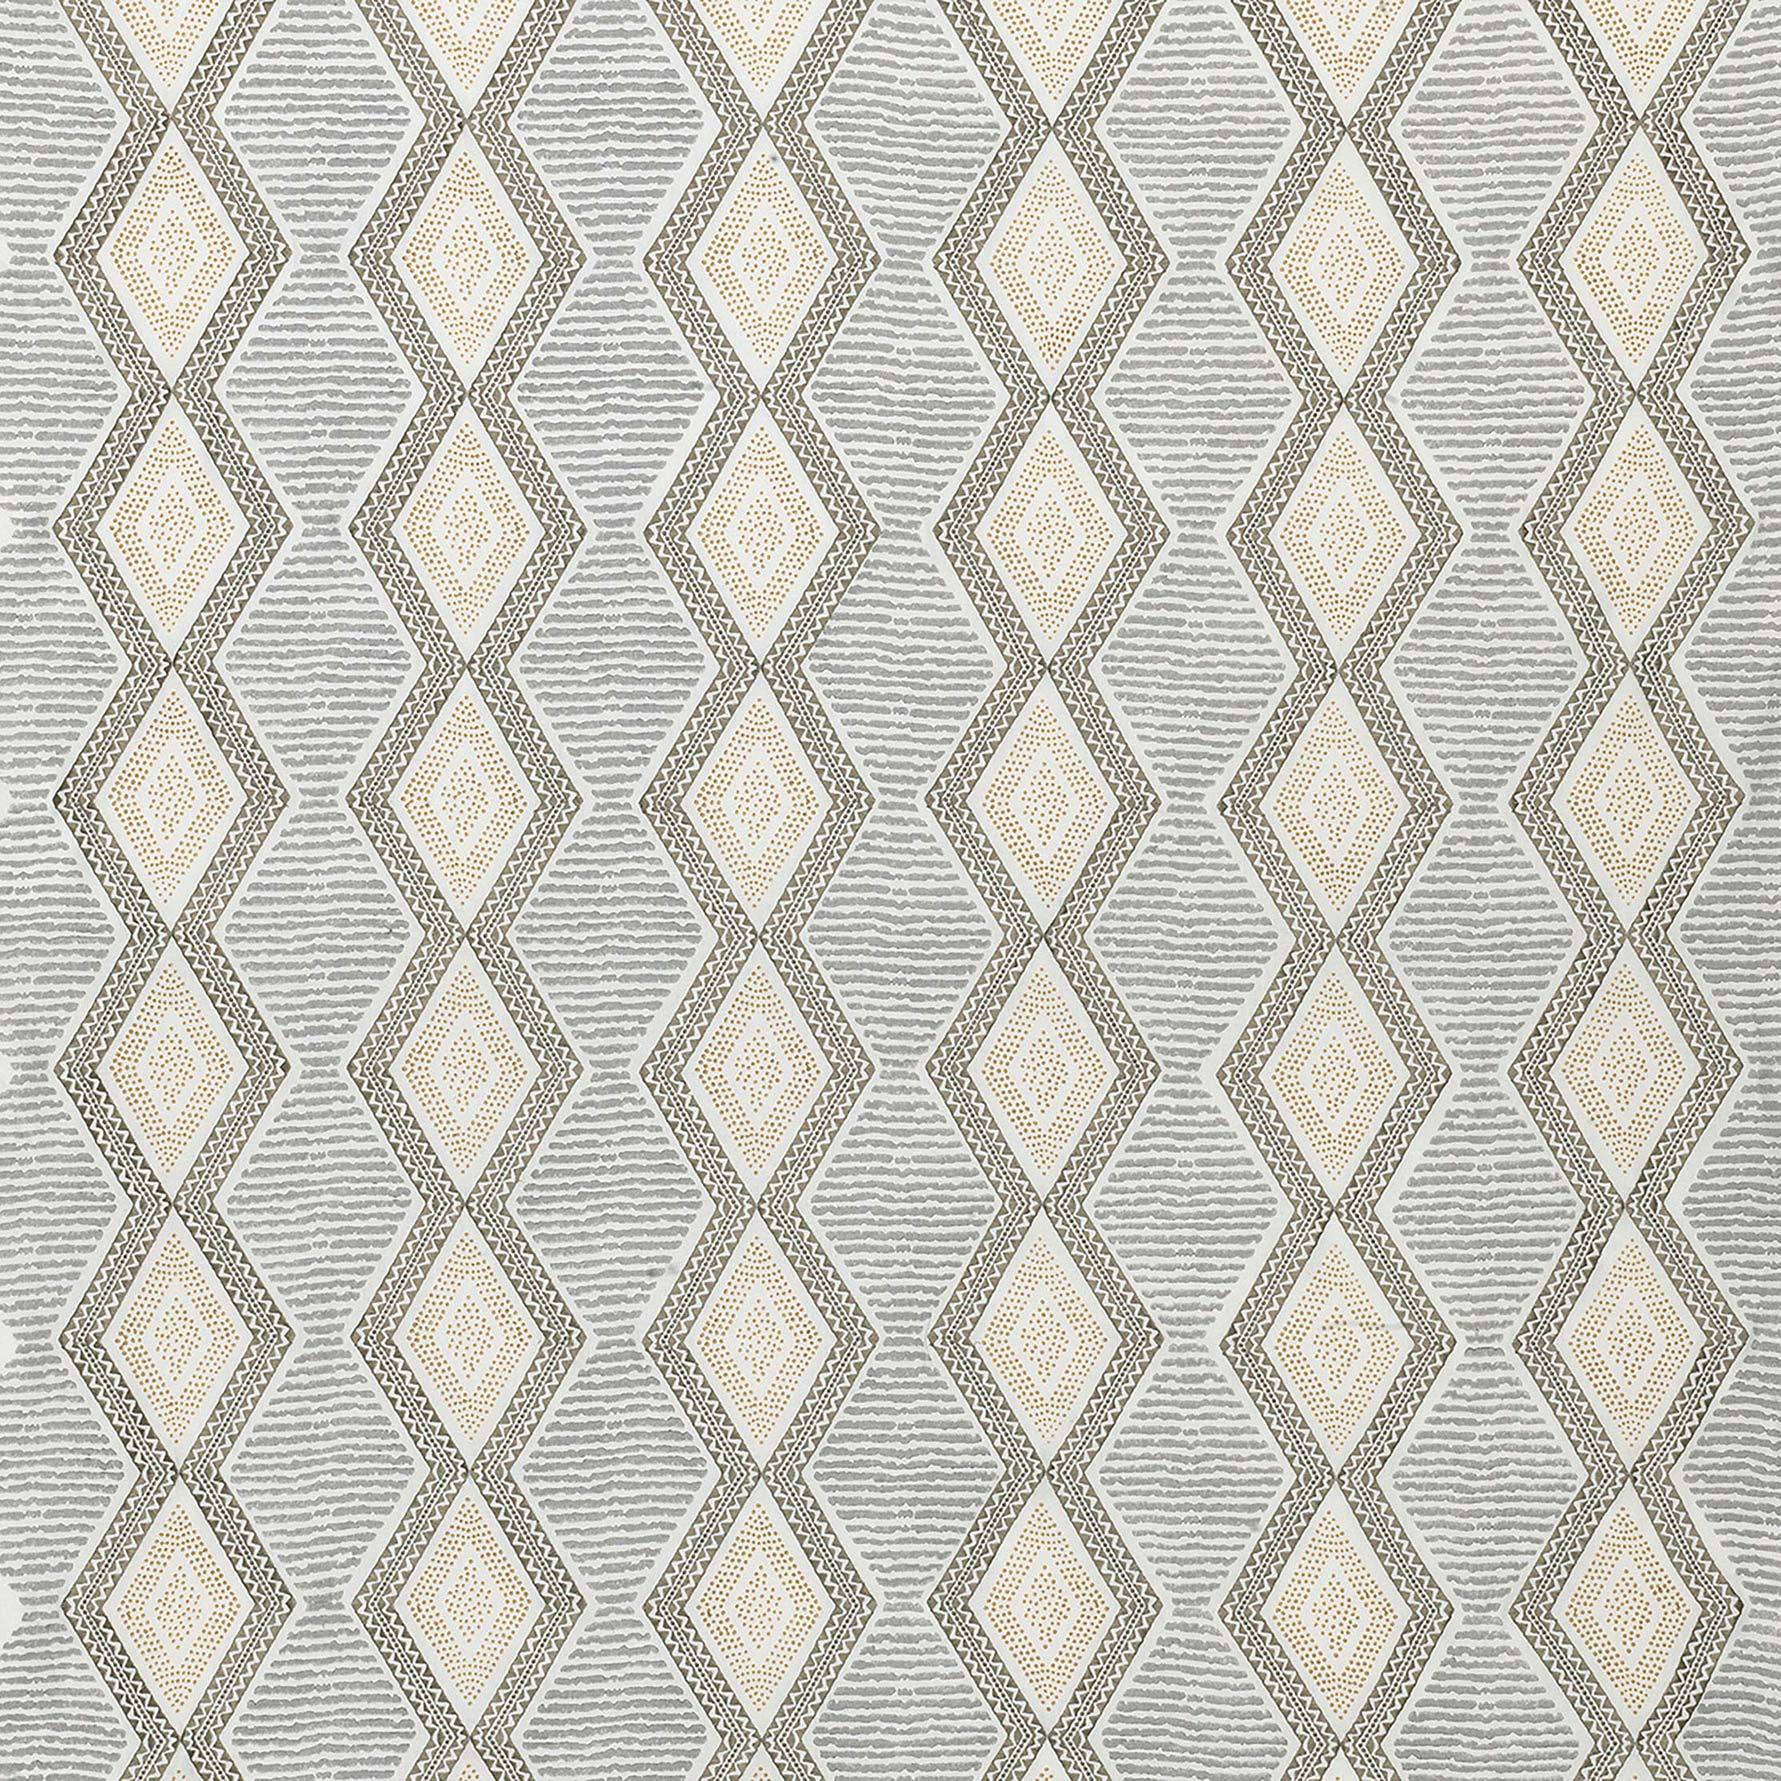 Nina Campbell Fabric - Les Rêves Belle Île Grey/Gold NCF4291-04